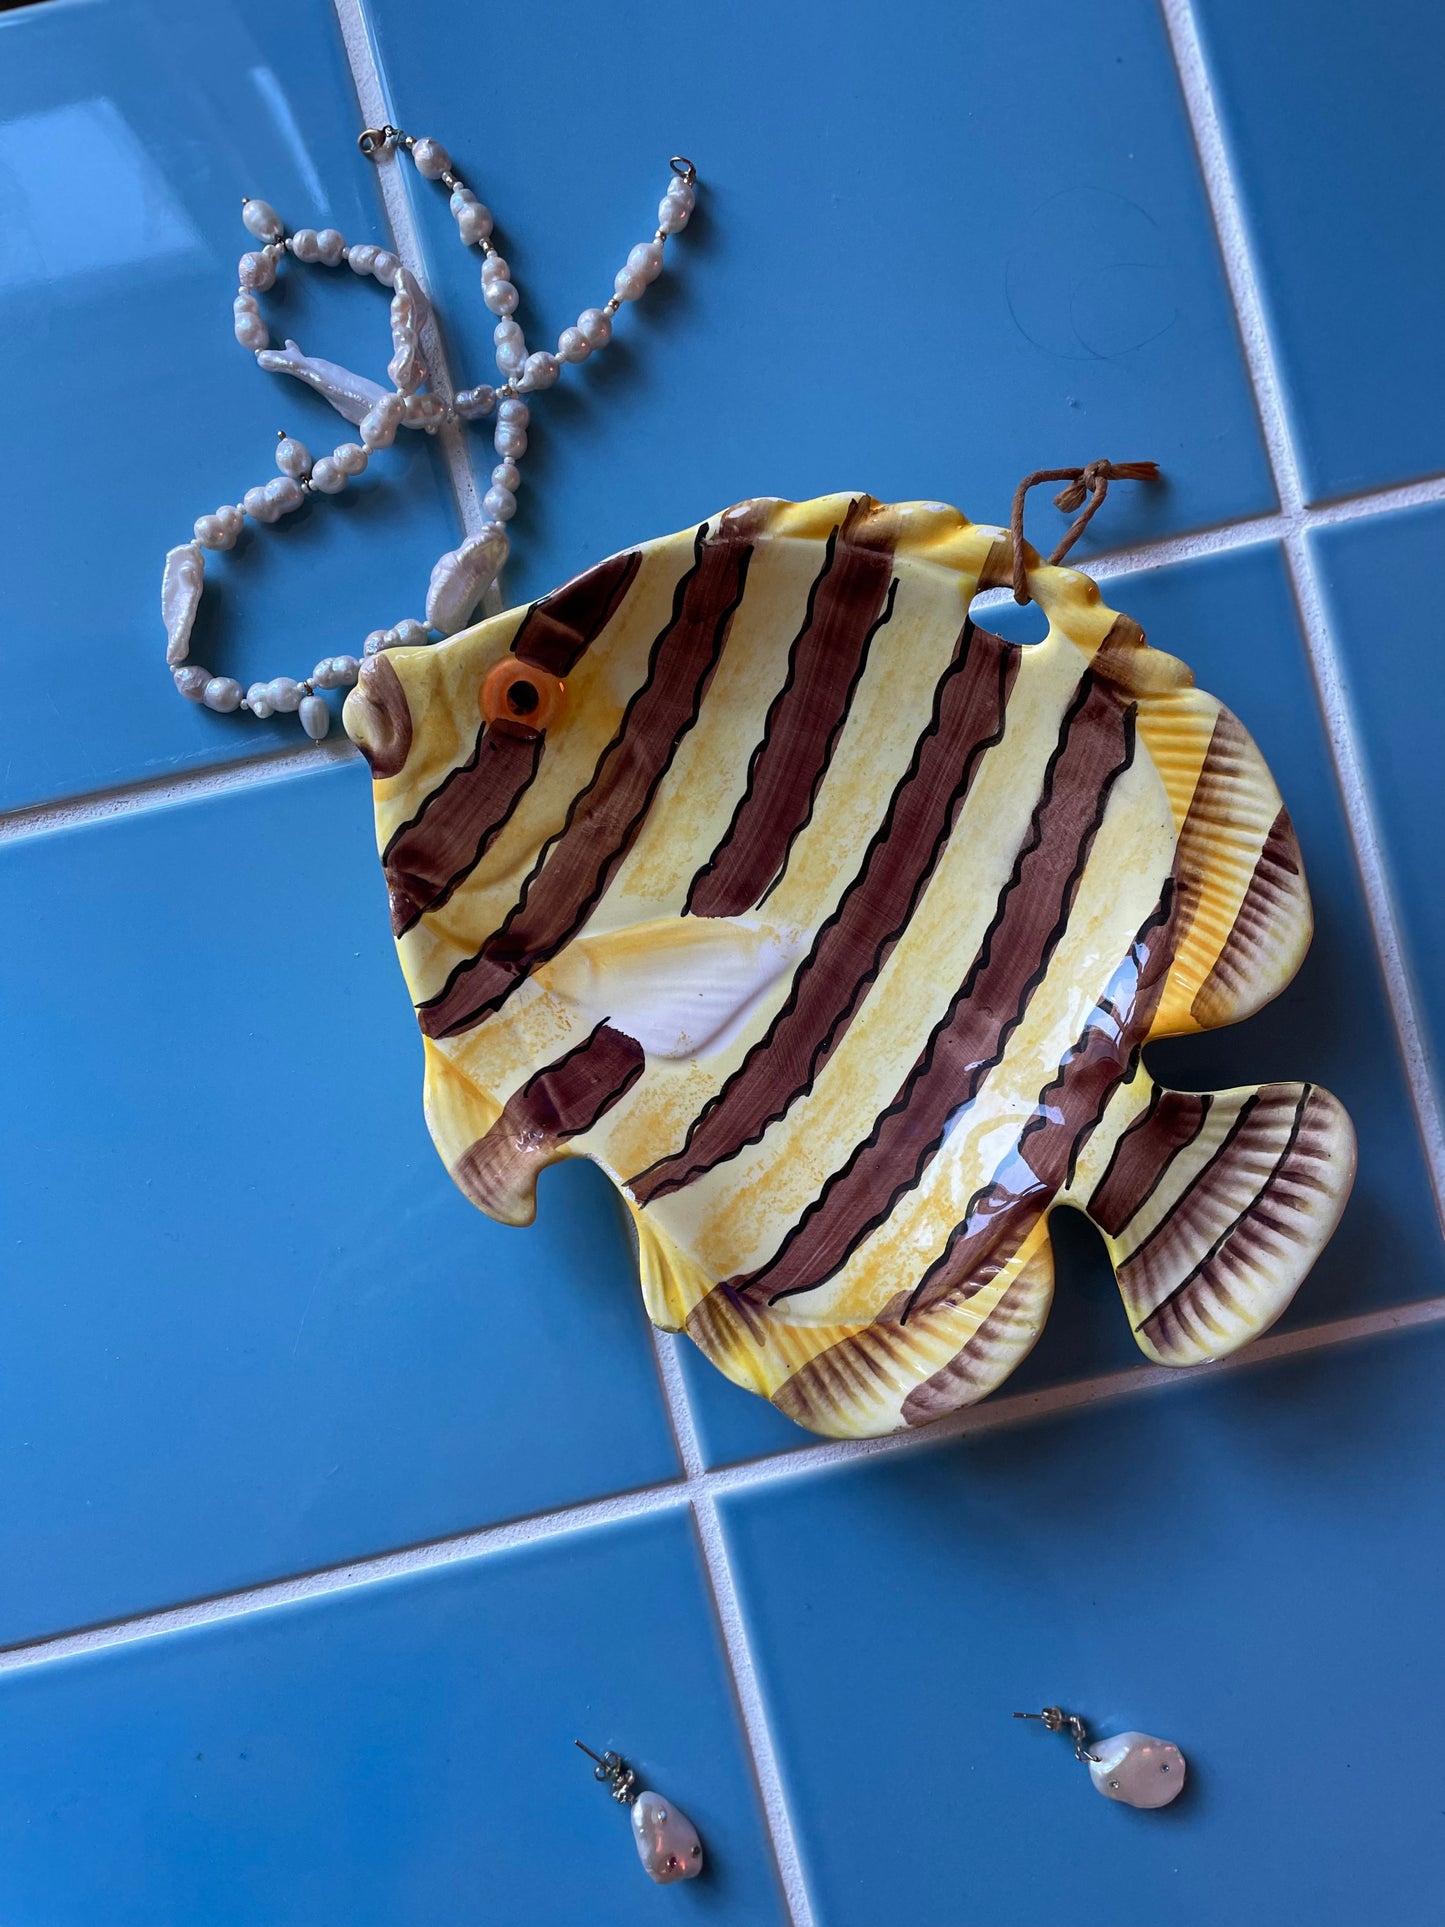 Adventurous fish as a dish or wall hanging